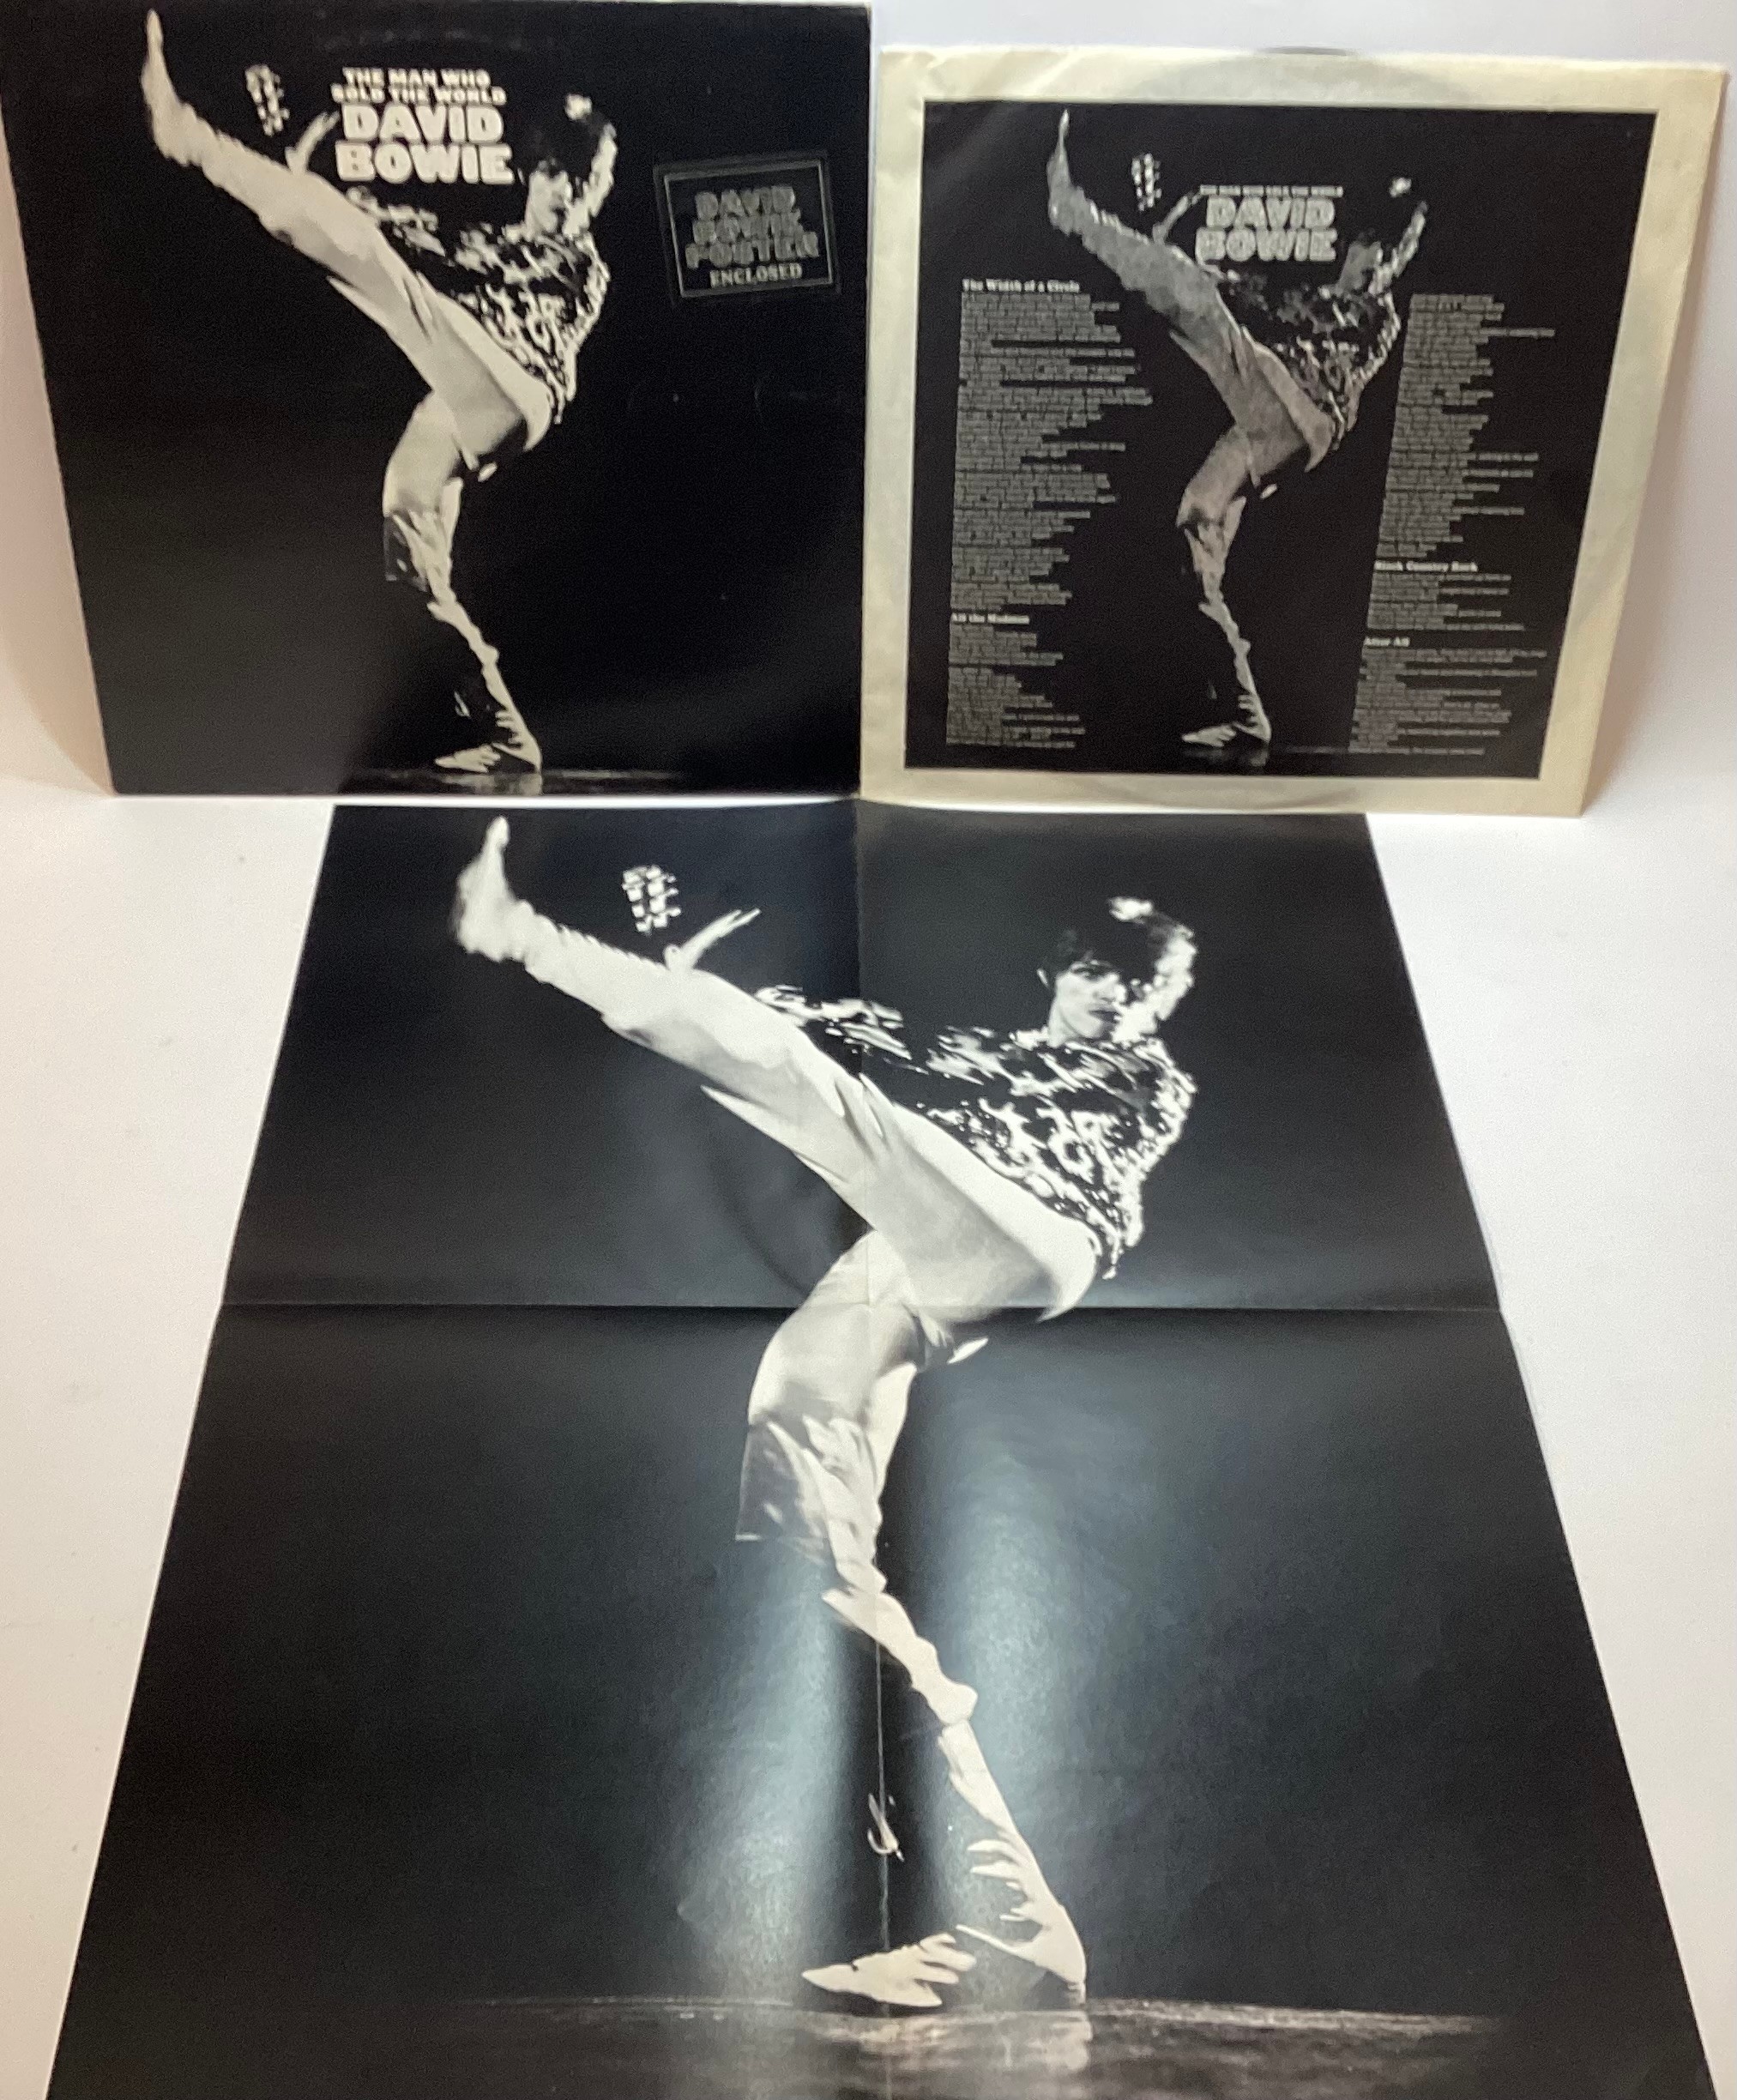 DAVID BOWIE ‘THE MAN WHO SOLD THE WORLD’ WITH INNER SLEEVE & POSTER. Ex condition vinyl album here